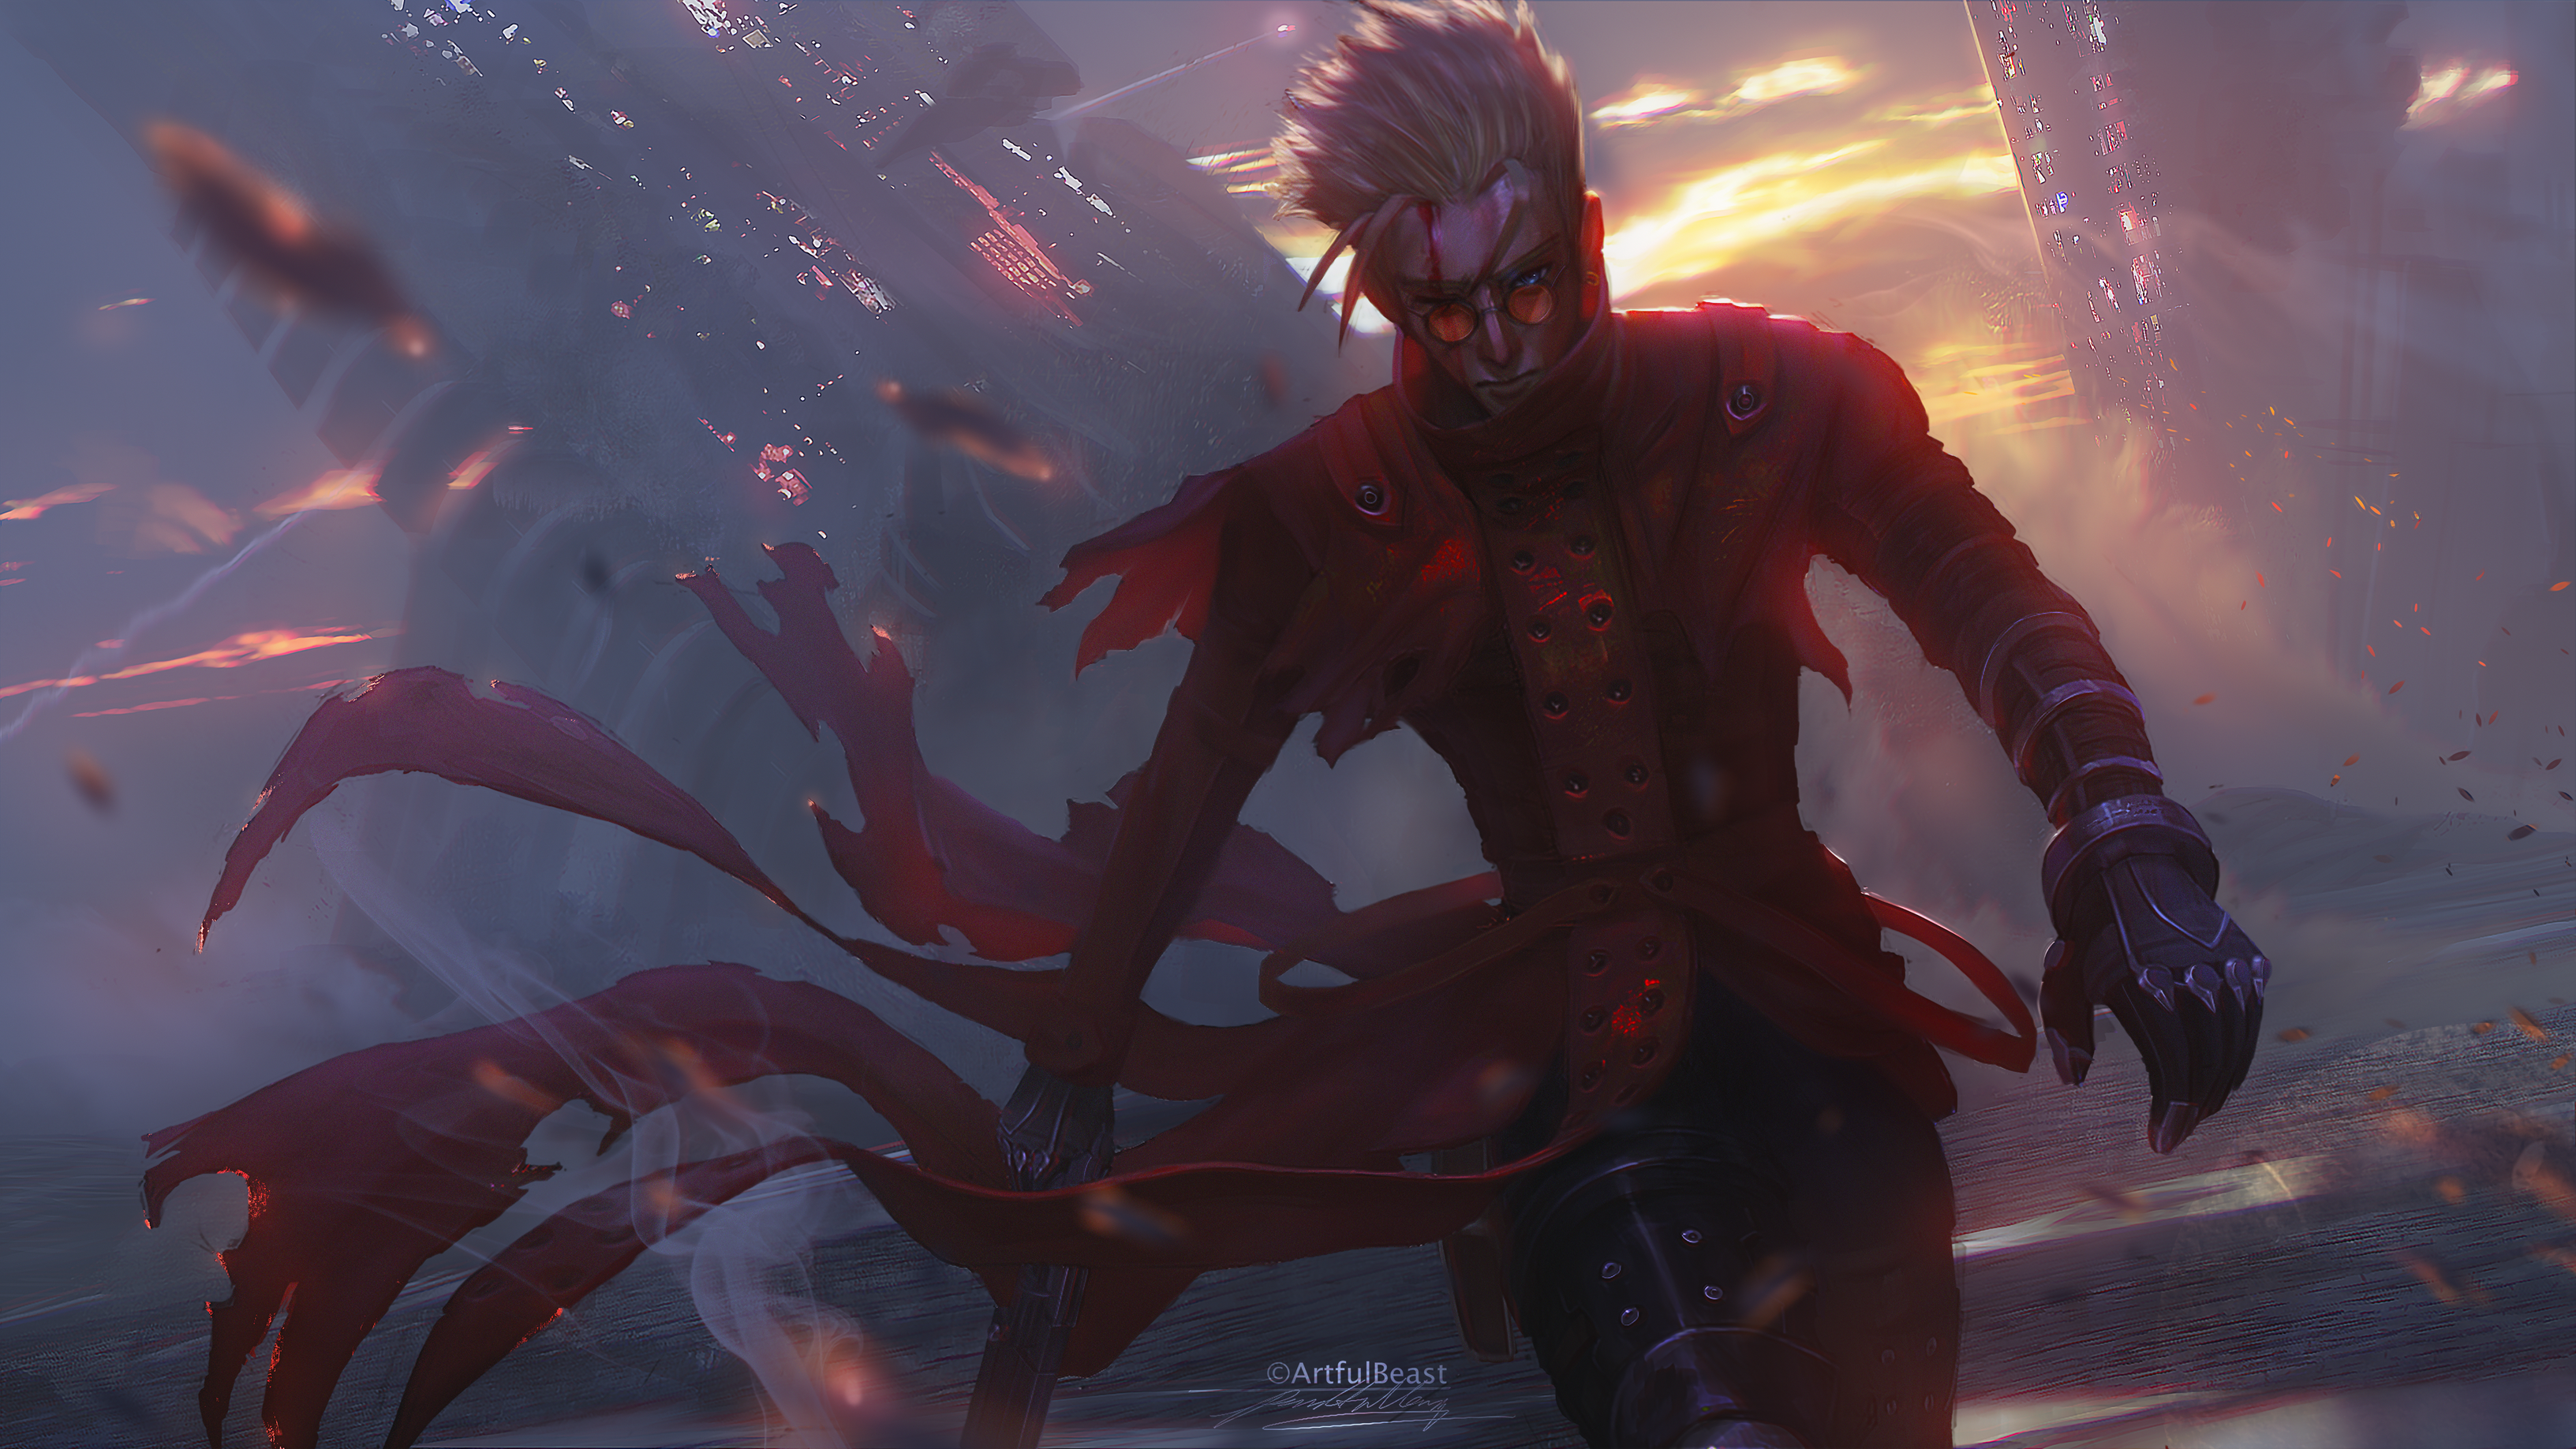 Vash The Stampede by Paul Nong